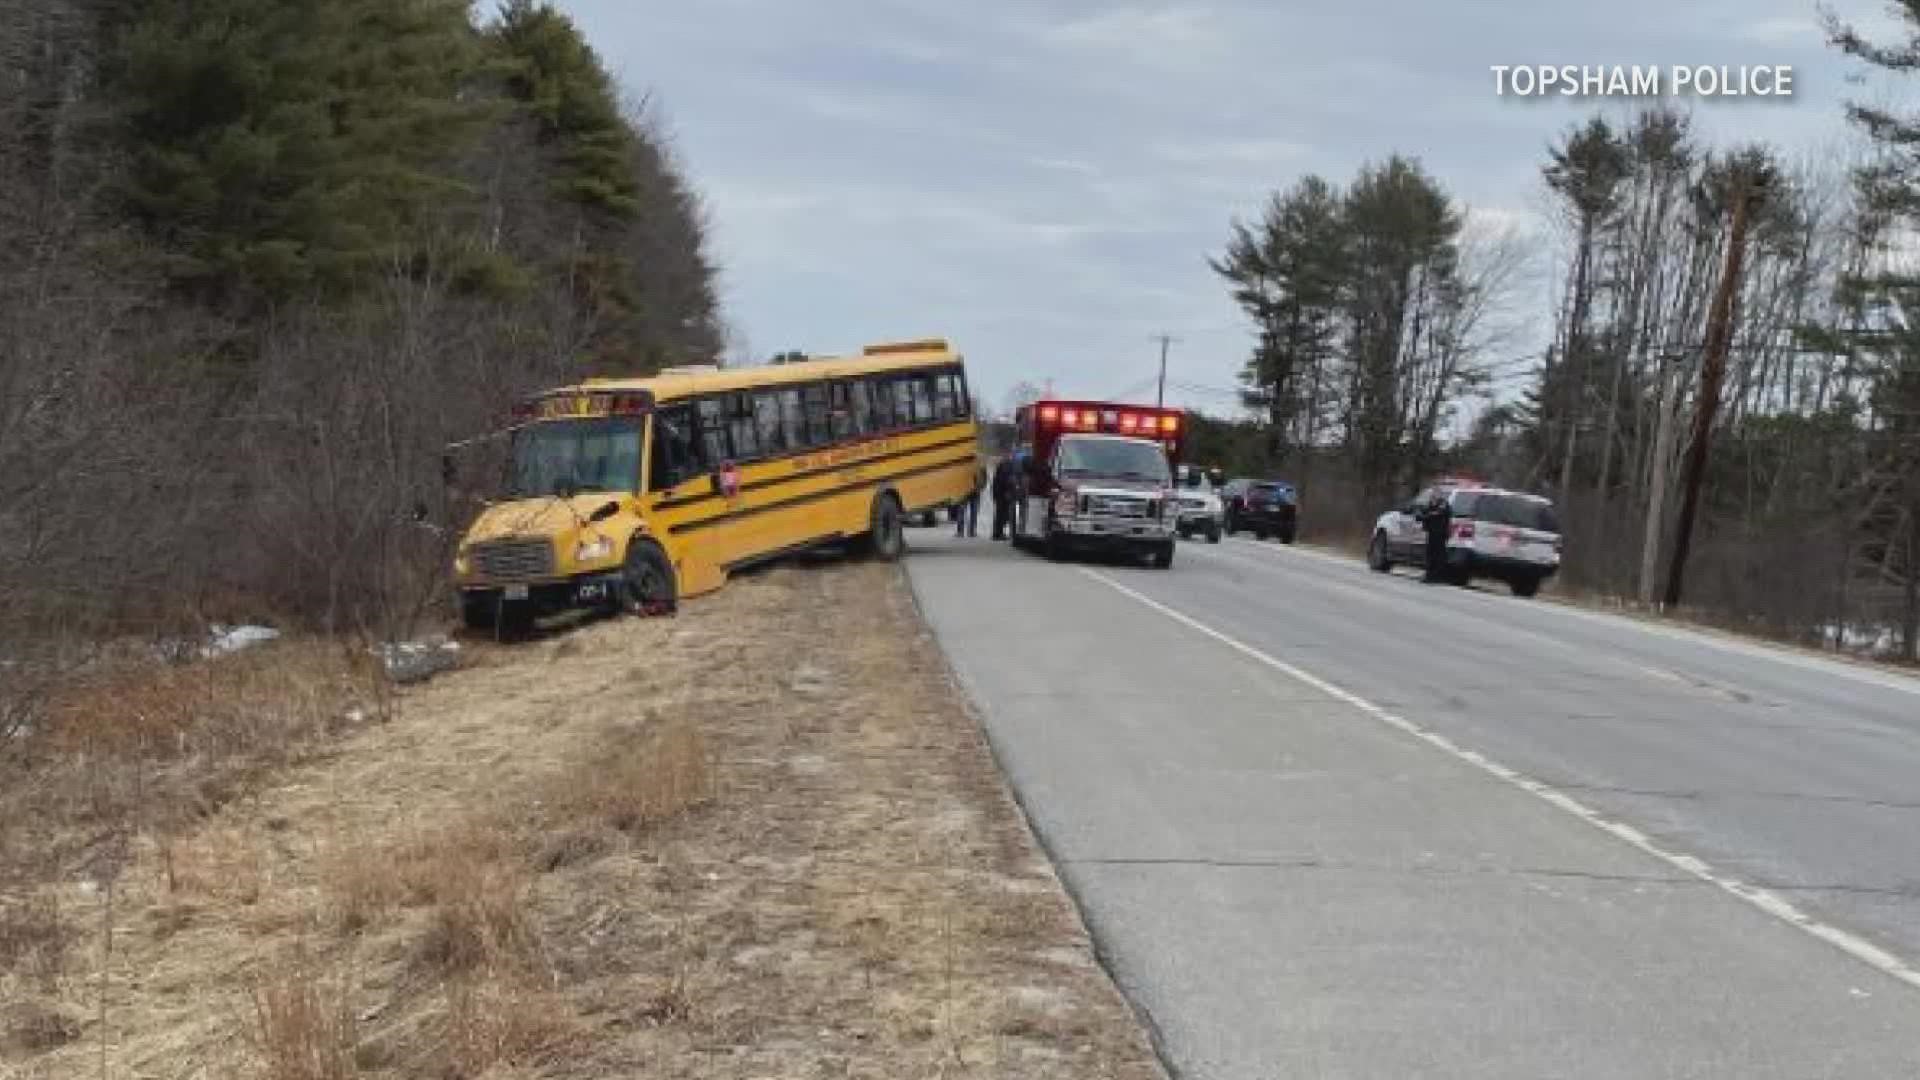 The driver who experienced a medical event while driving a school bus in Topsham has died, according to an email from MSAD 75 superintendent Bob Lucy.